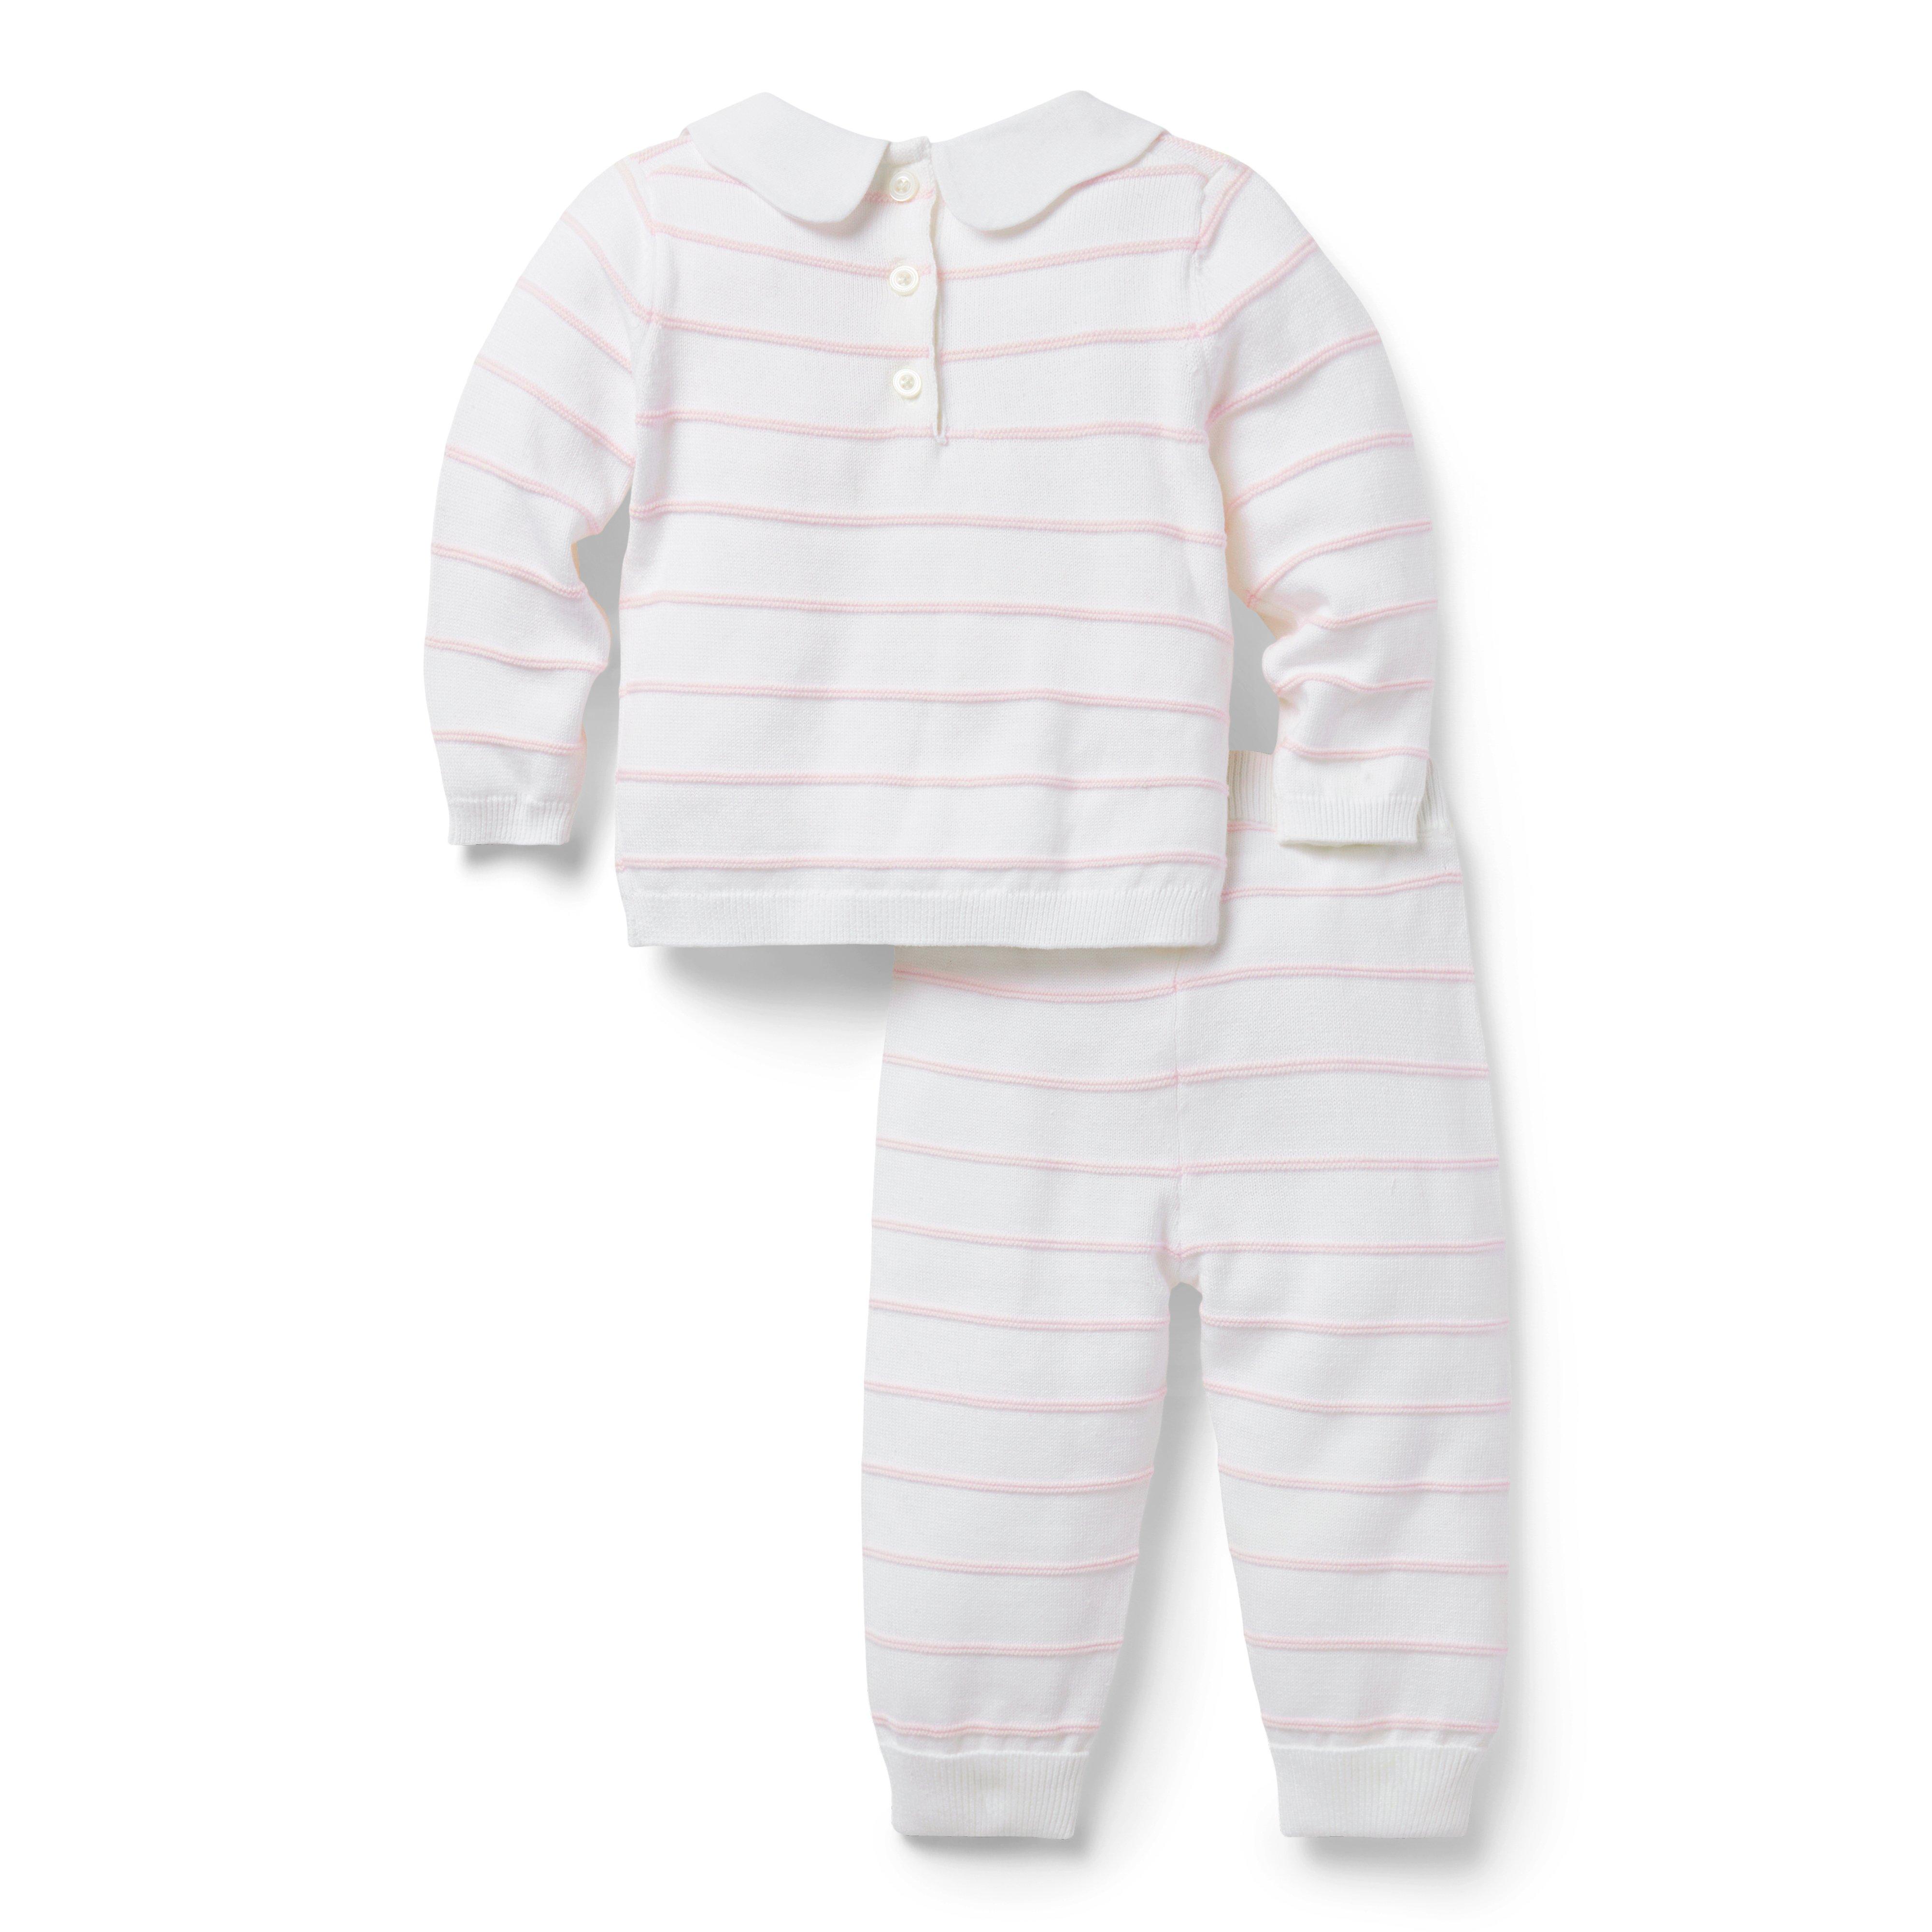 Baby Striped Collared Matching Set image number 1